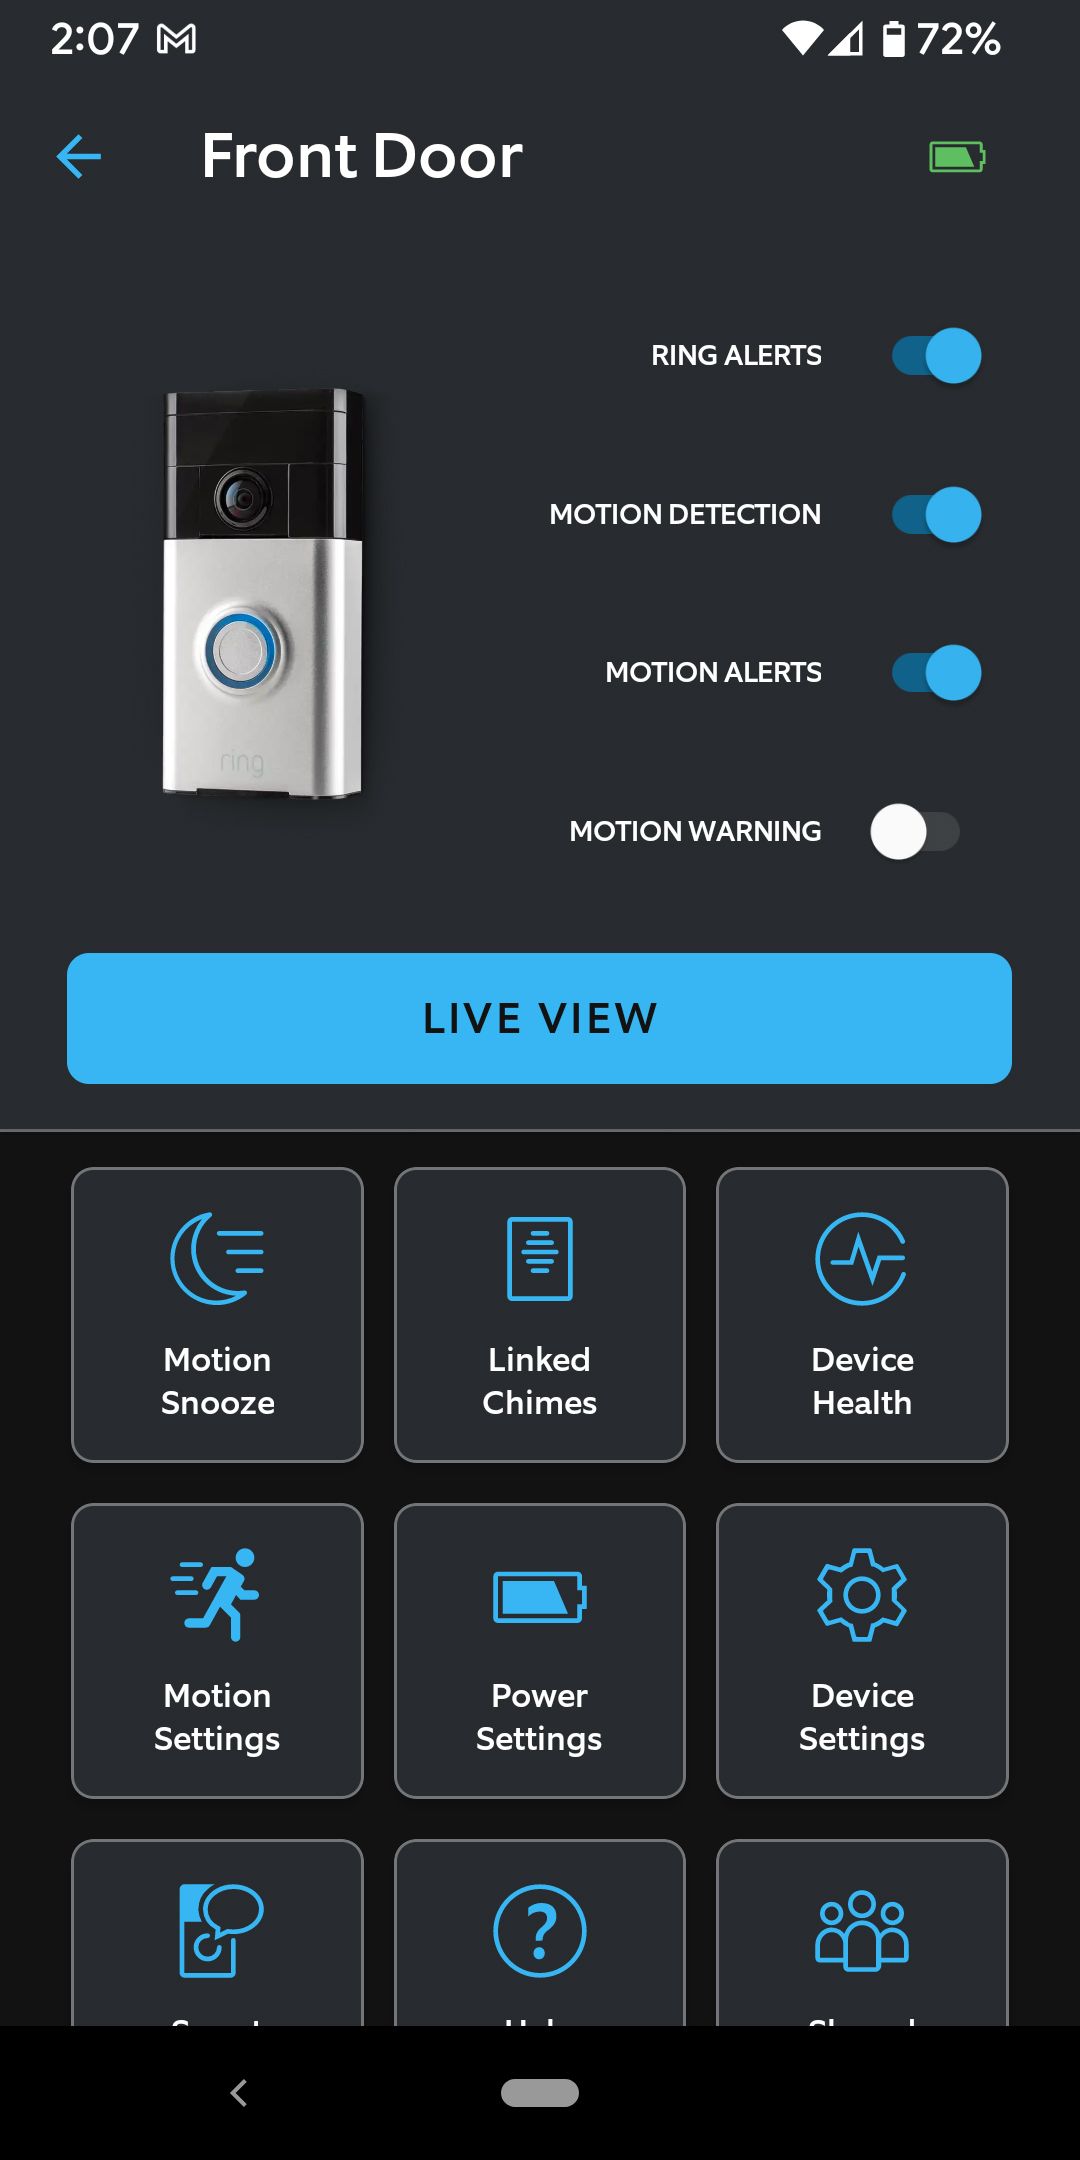 how-to-adjust-your-ring-video-doorbell-s-motion-sensitivity-and-zones